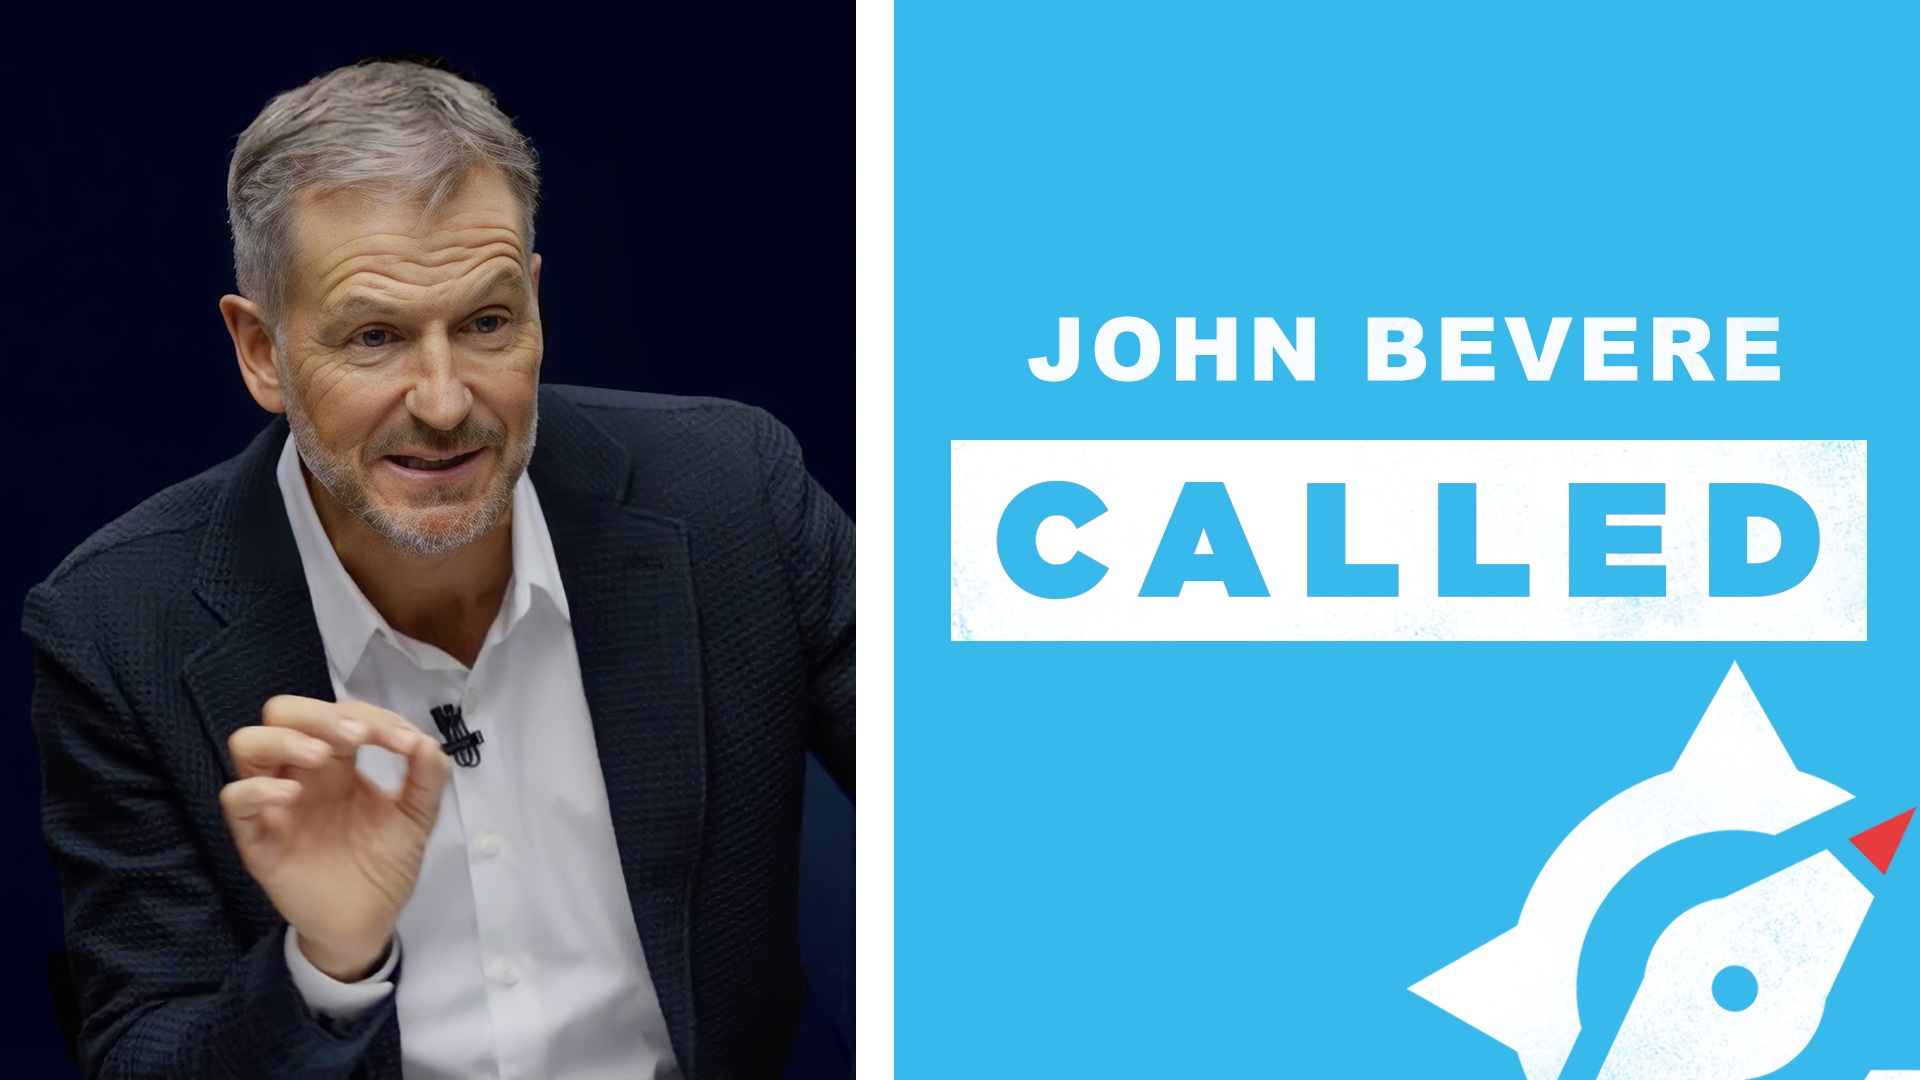 Called course by John Bevere